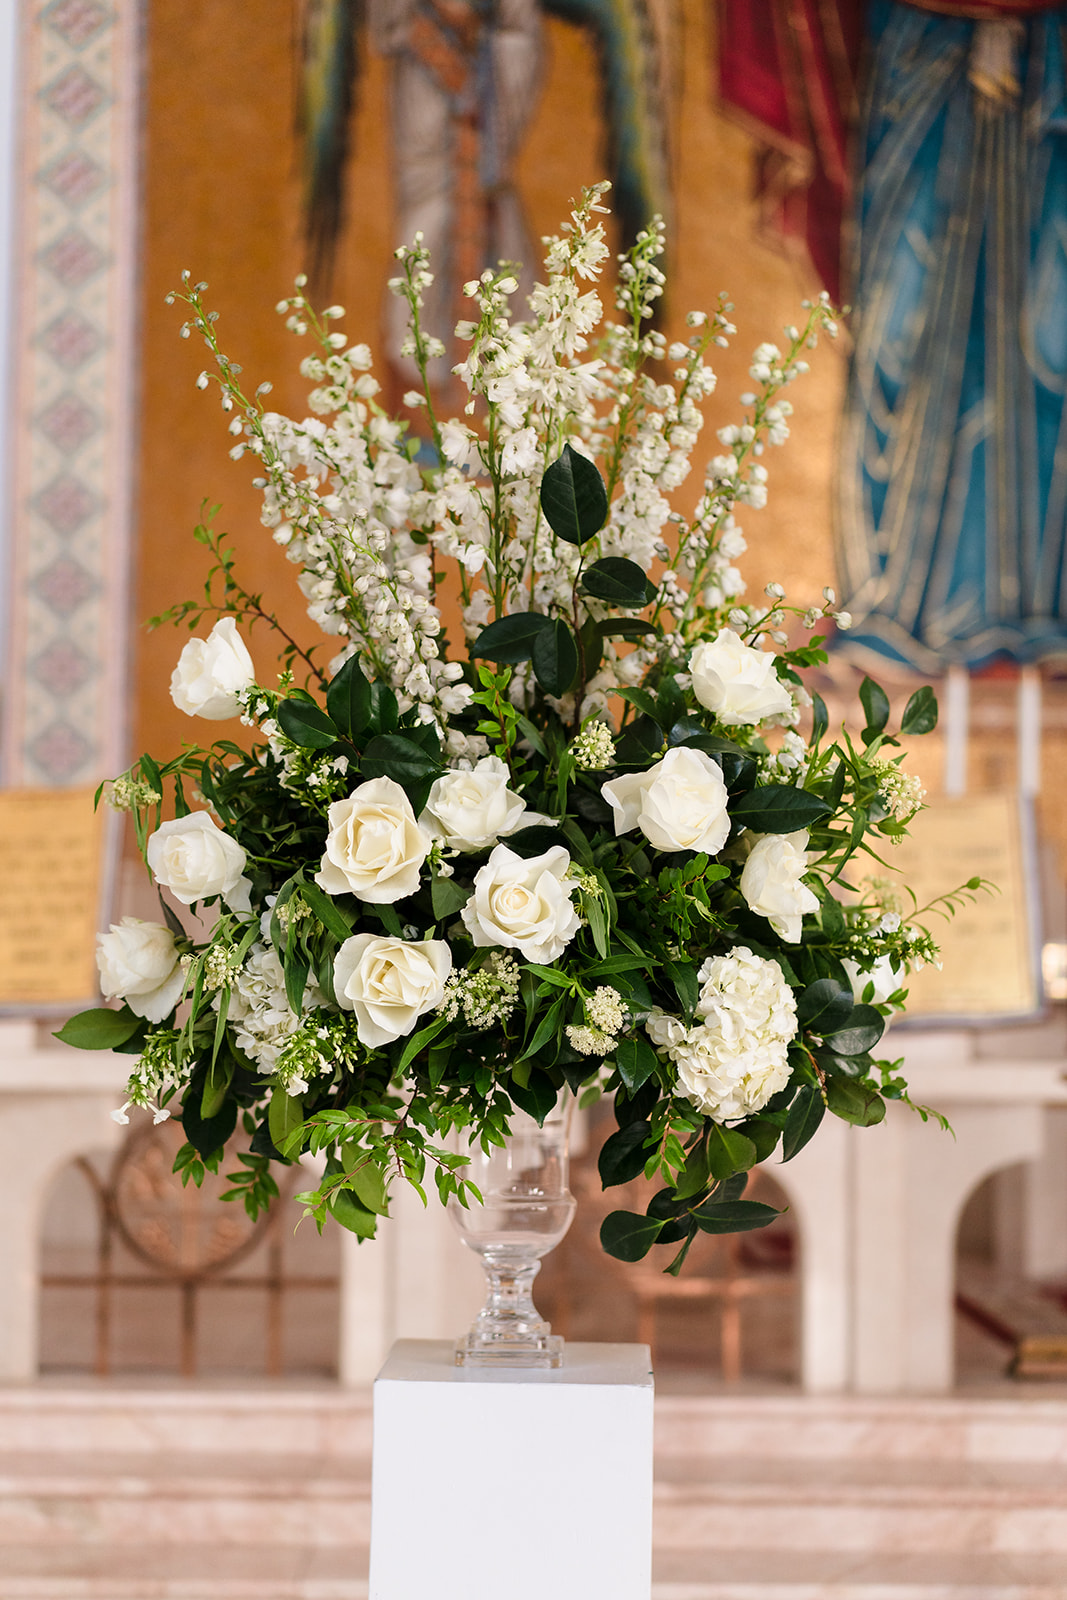 While floral bouquets decorate church wedidng ceremony